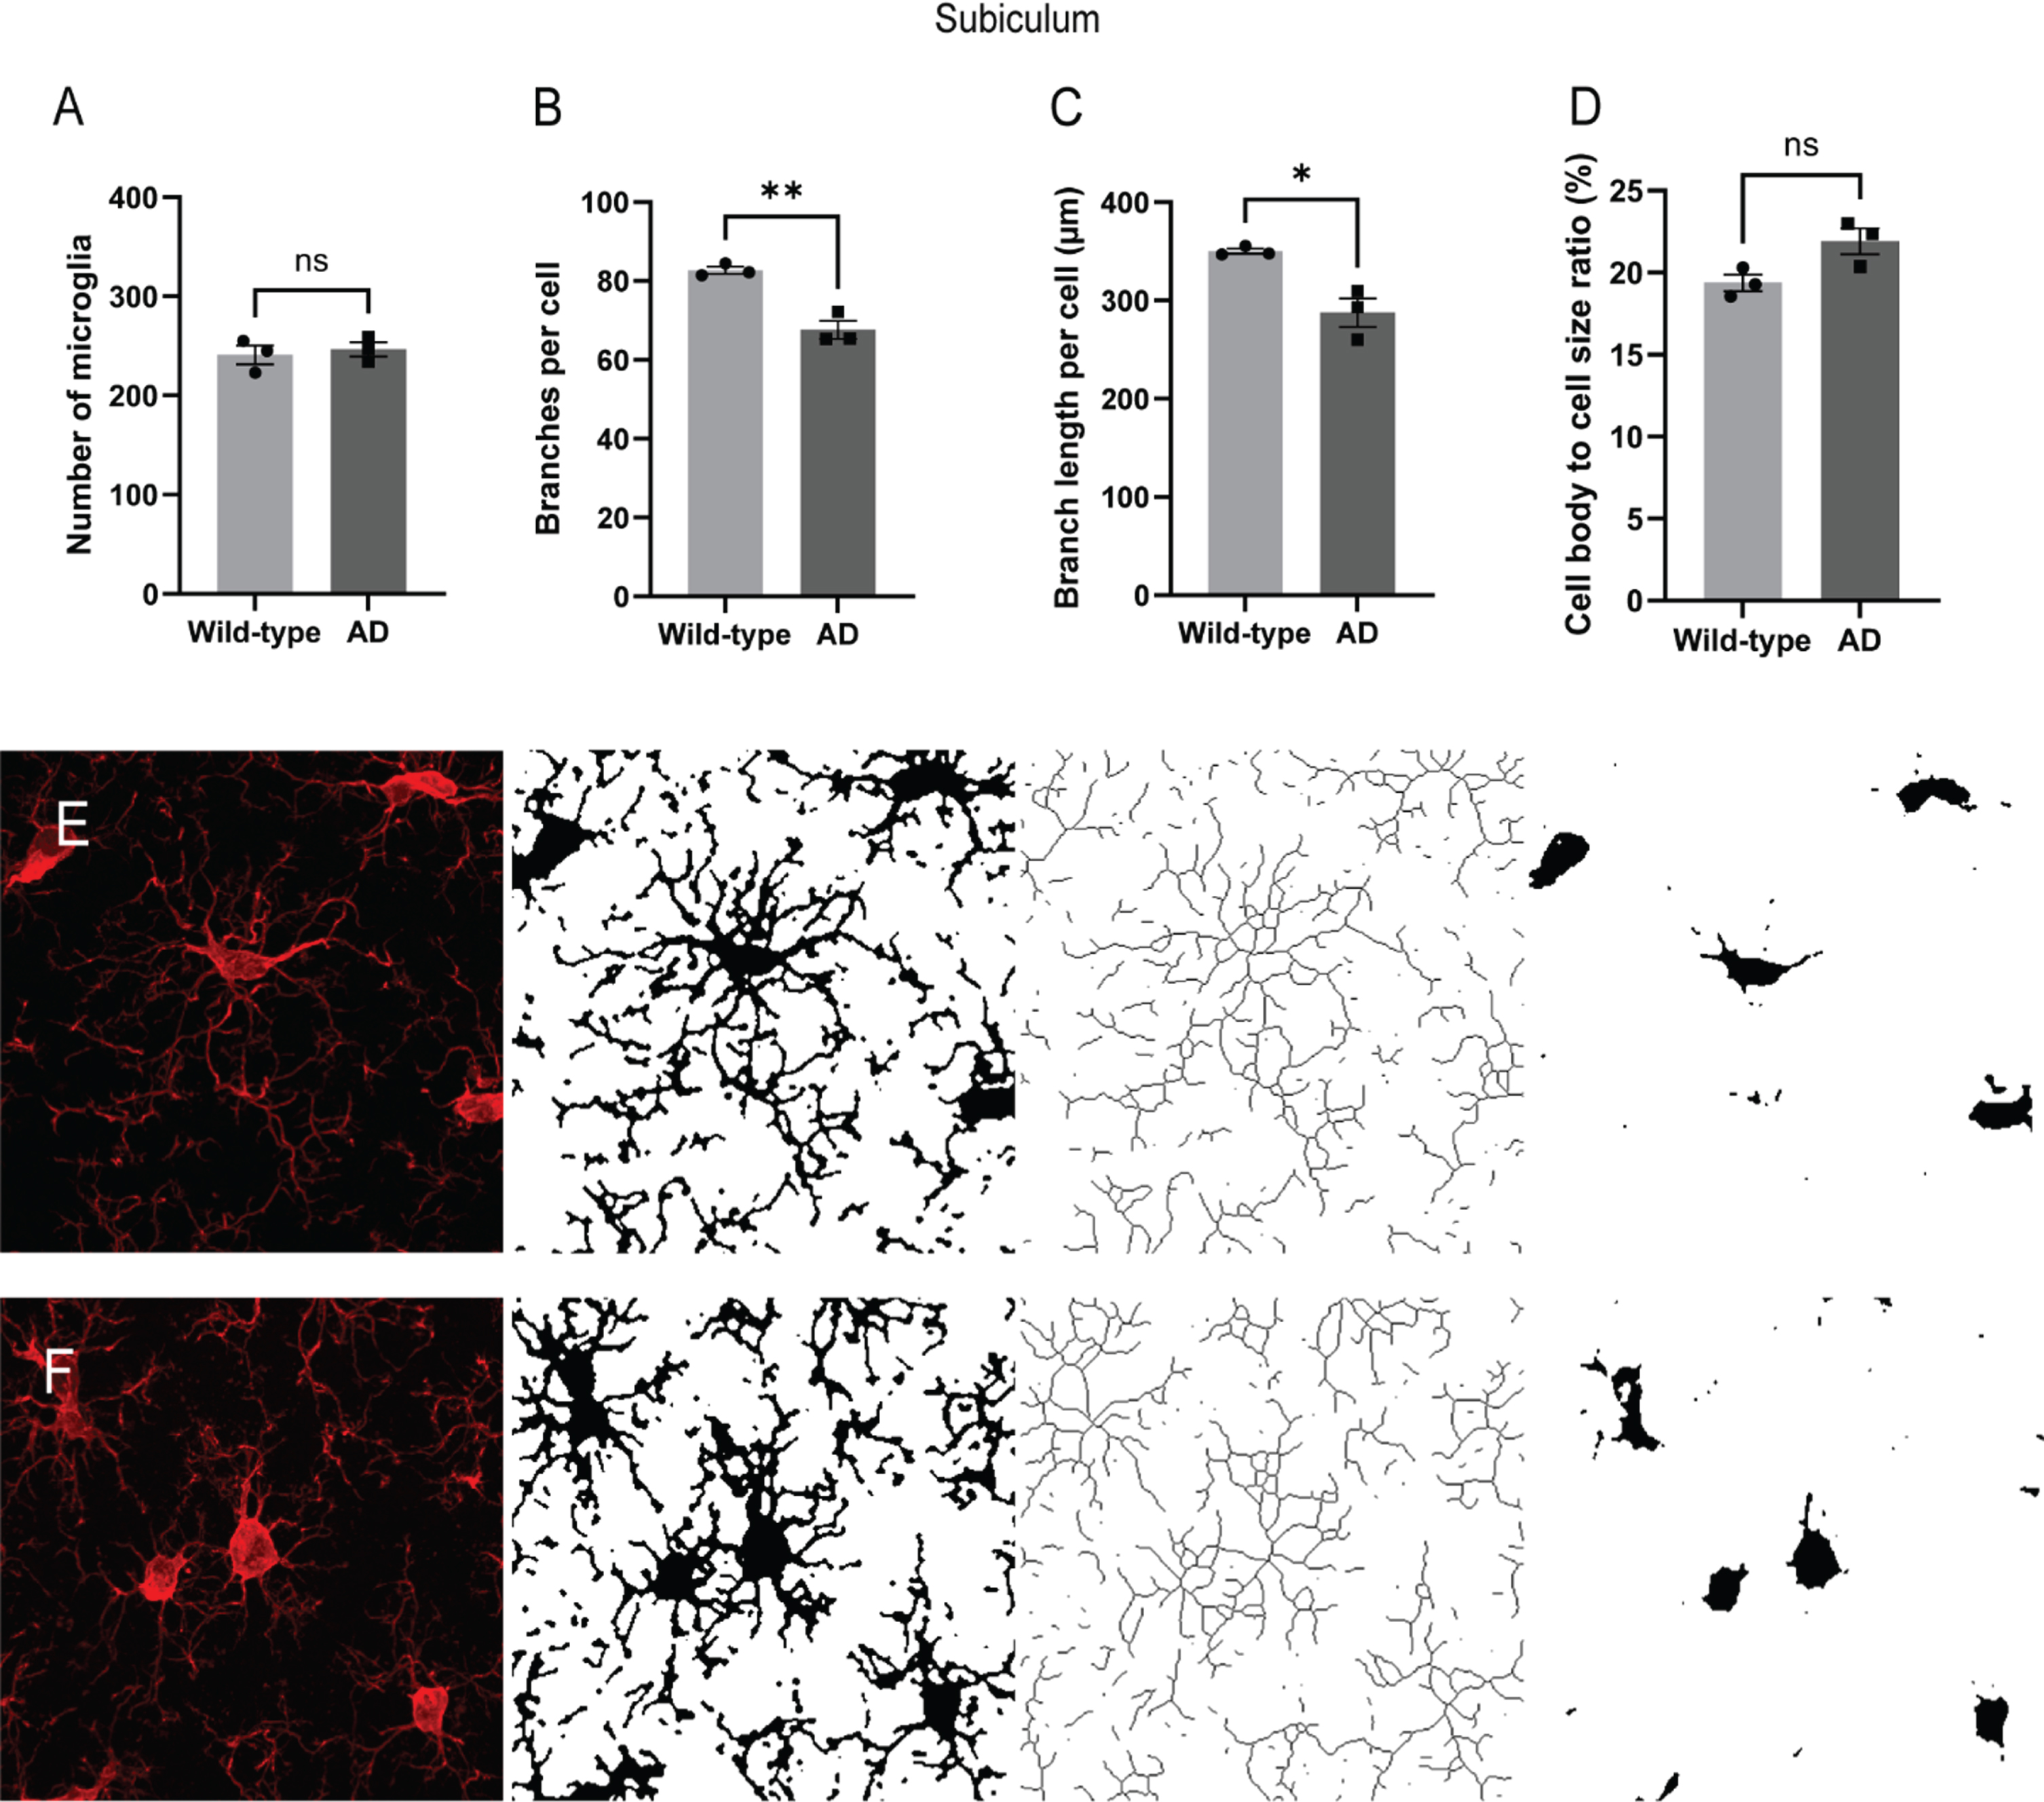 Alterations in microglial morphology in the subiculum of the transgenic AD rats. The number of microglia and their morphological complexity was assessed in dorsal subiculum (A-D) of the AD rats (n = 3, age mean±standard deviation; 6.9±0.10 months) and the wild-type control rats (n = 3, age 6.8±0.10 months). Representative images of Iba1-staining of microglia in AD (E) and wild-type rats (F) with corresponding binary and skeletonized images for skeleton analysis and cell body size measurement. Two-tailed unpaired t-test, *p <  0.05, **p <  0.001.